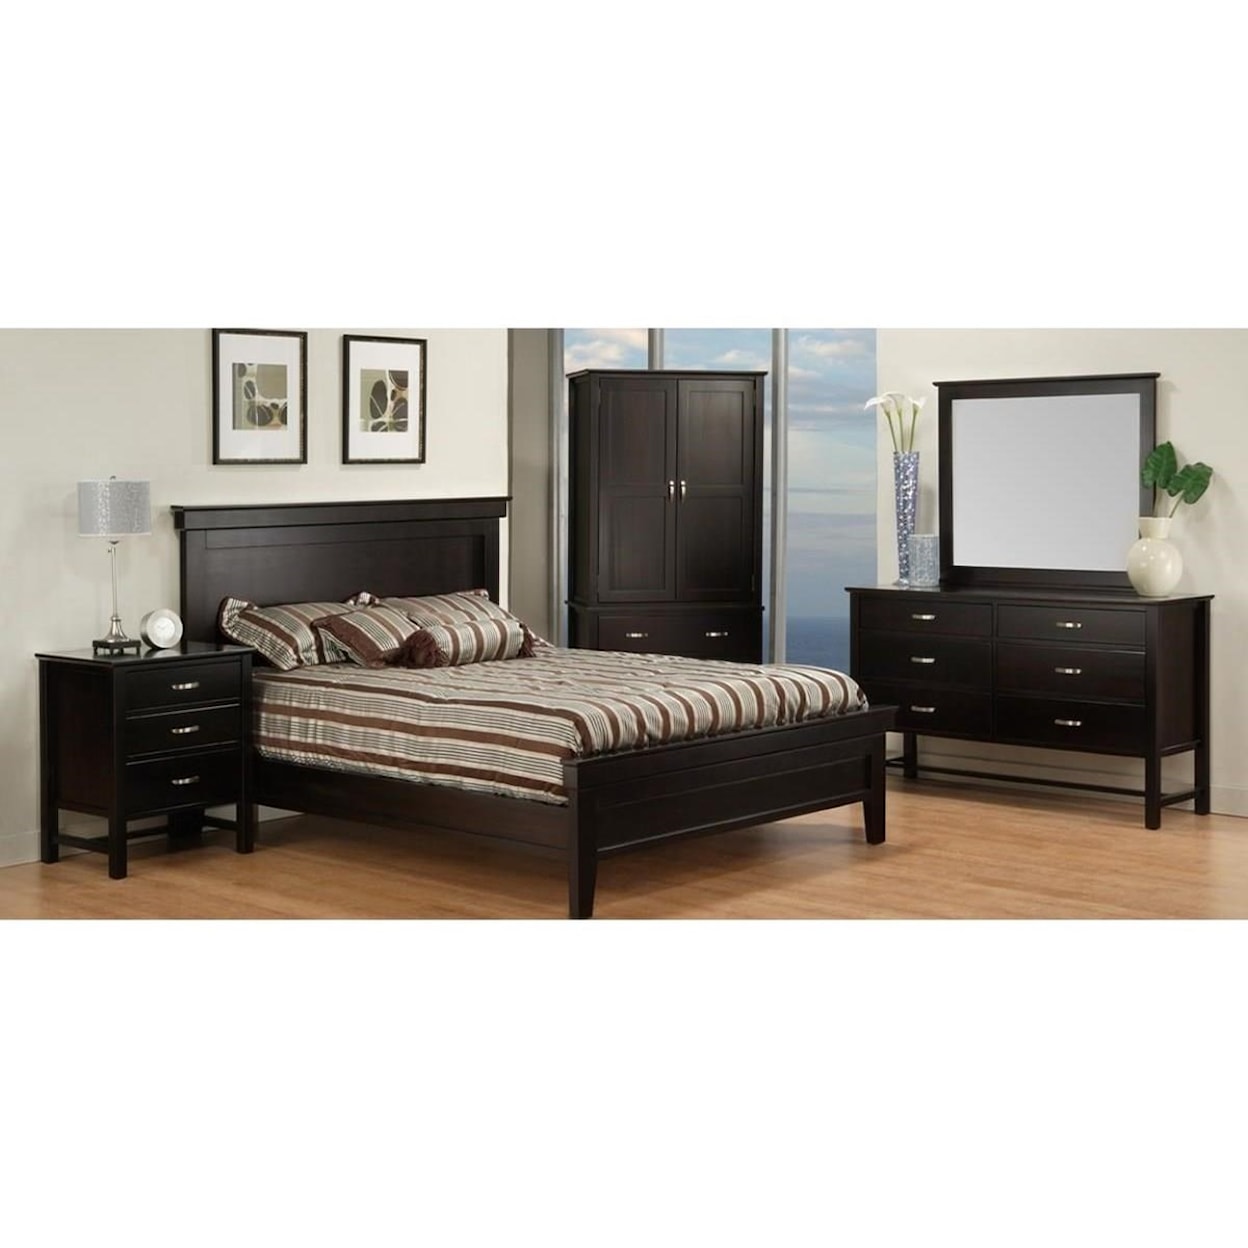 Handstone Brooklyn Full Bed with Low Footboard